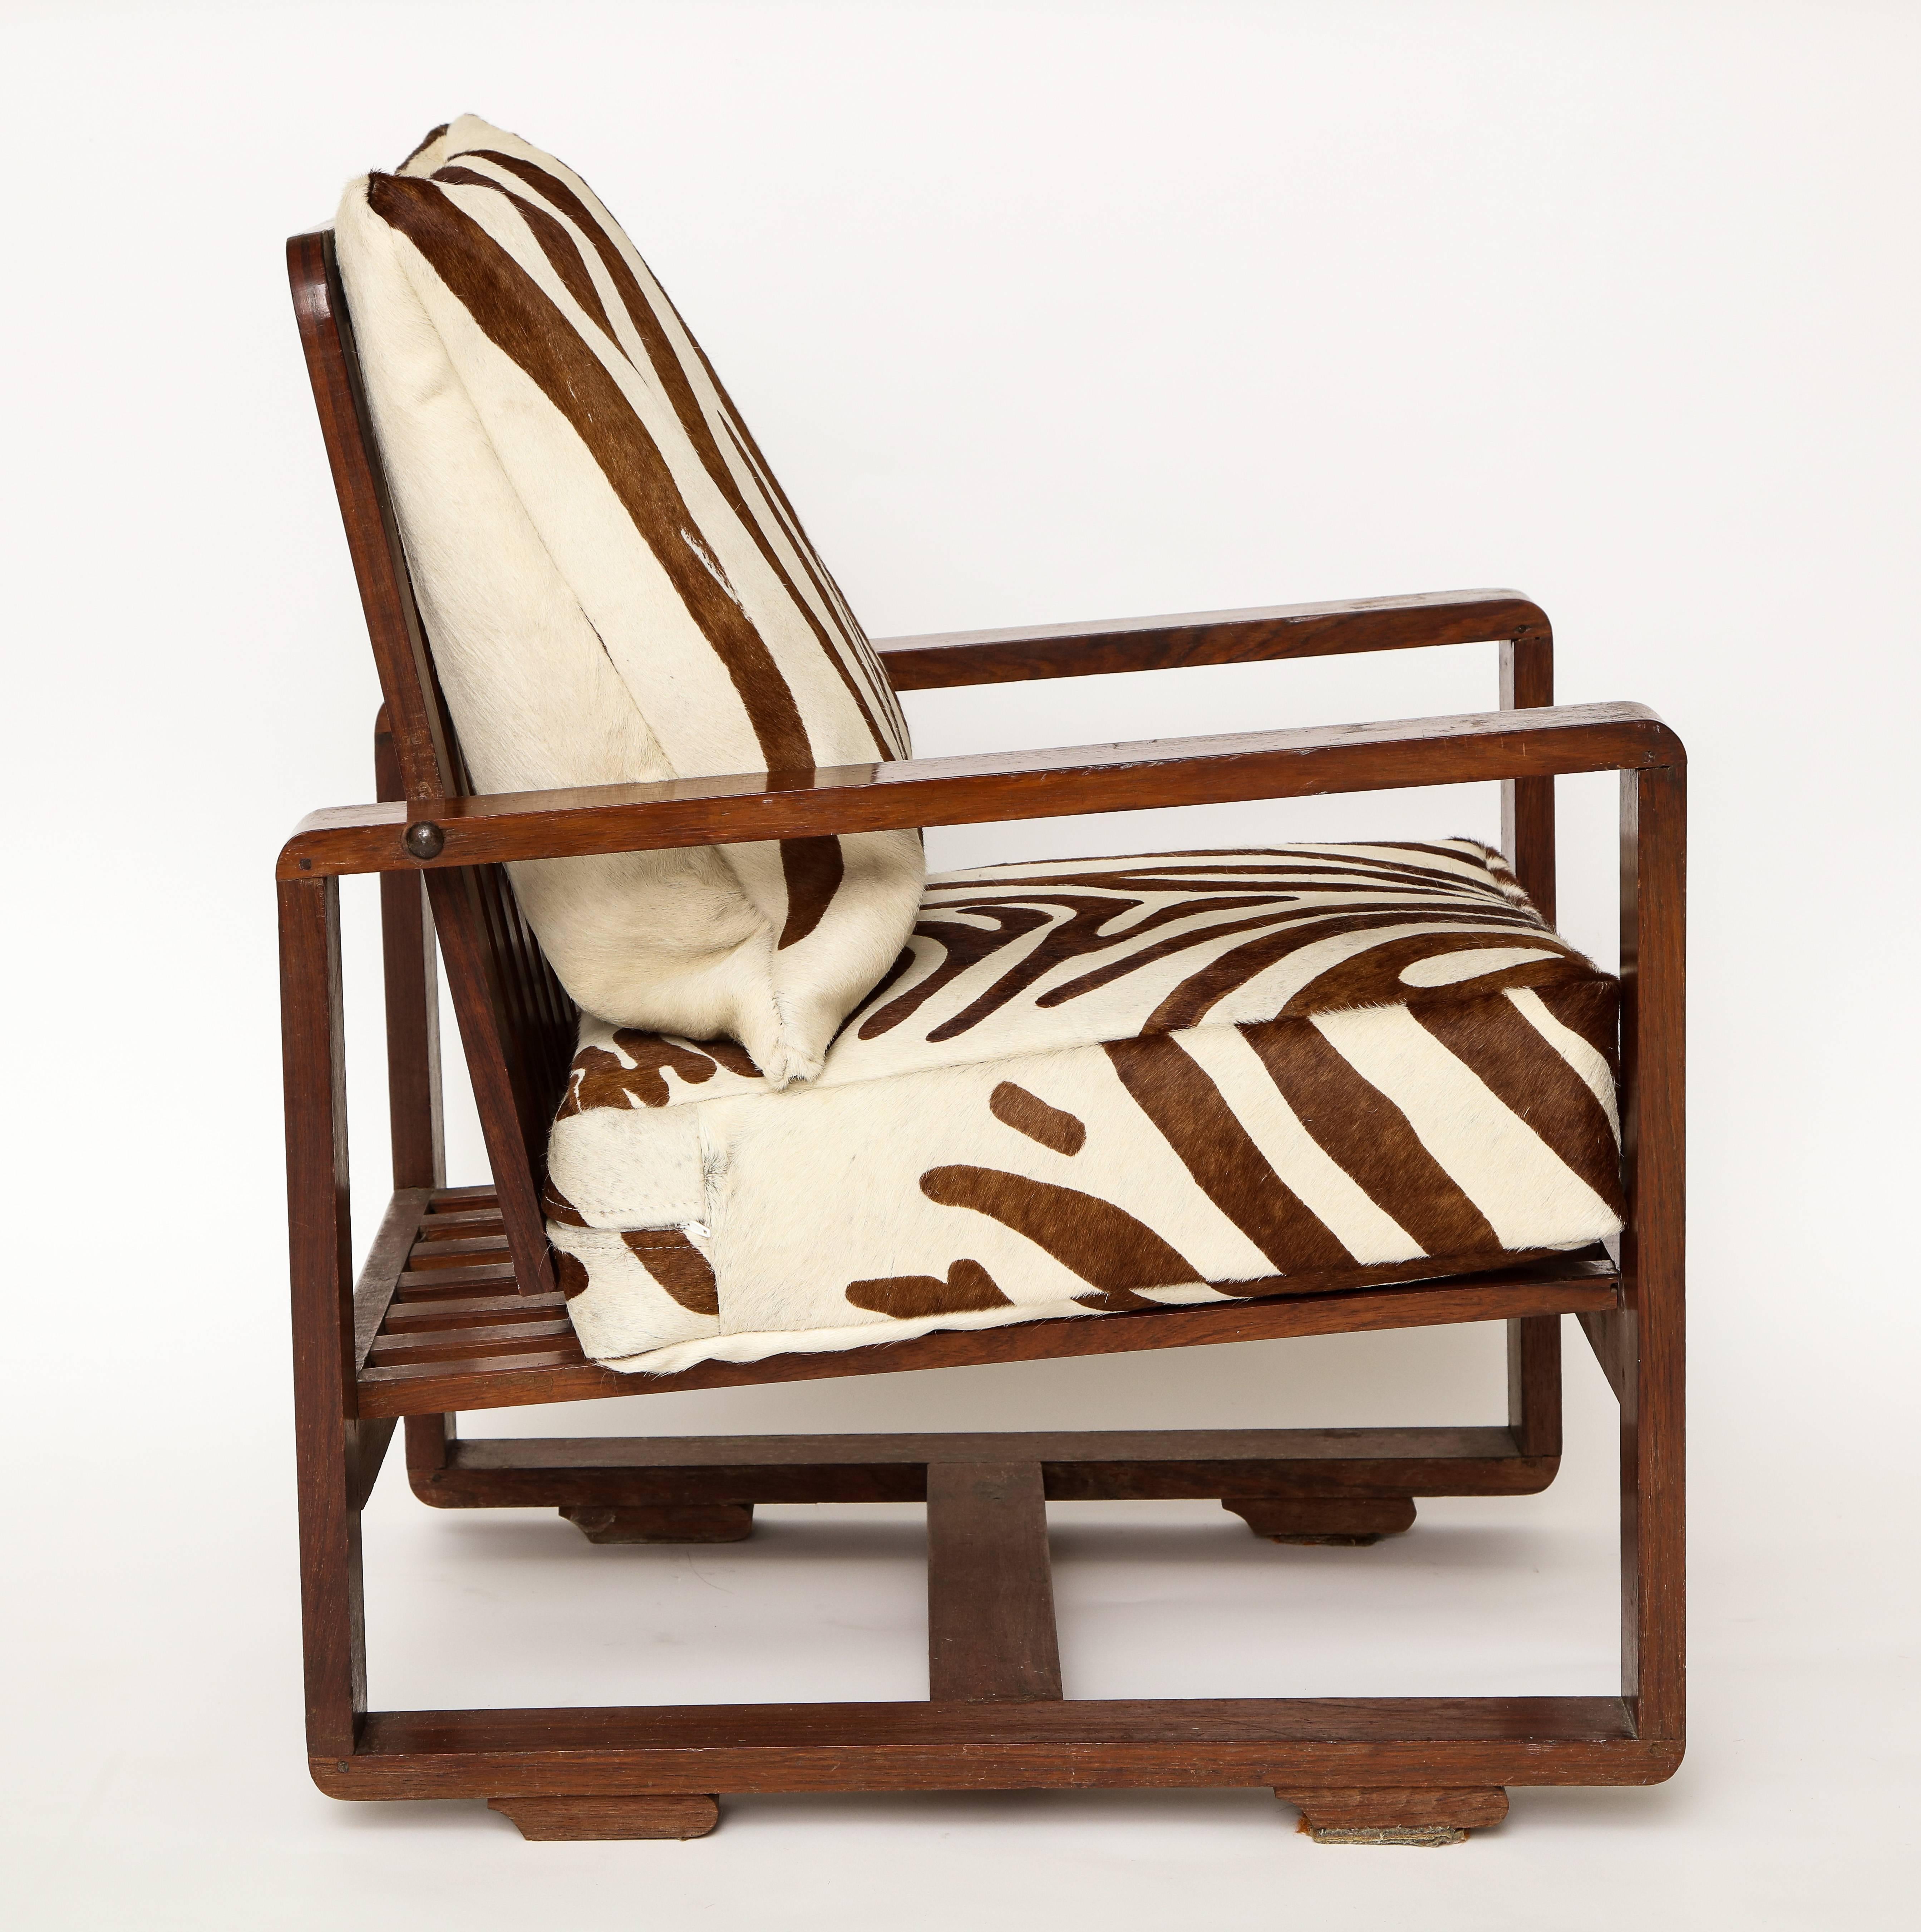 French Sornay Attr. Art Deco Rosewood Lounge Chairs, France 1930s-1940s, Mid-Century For Sale